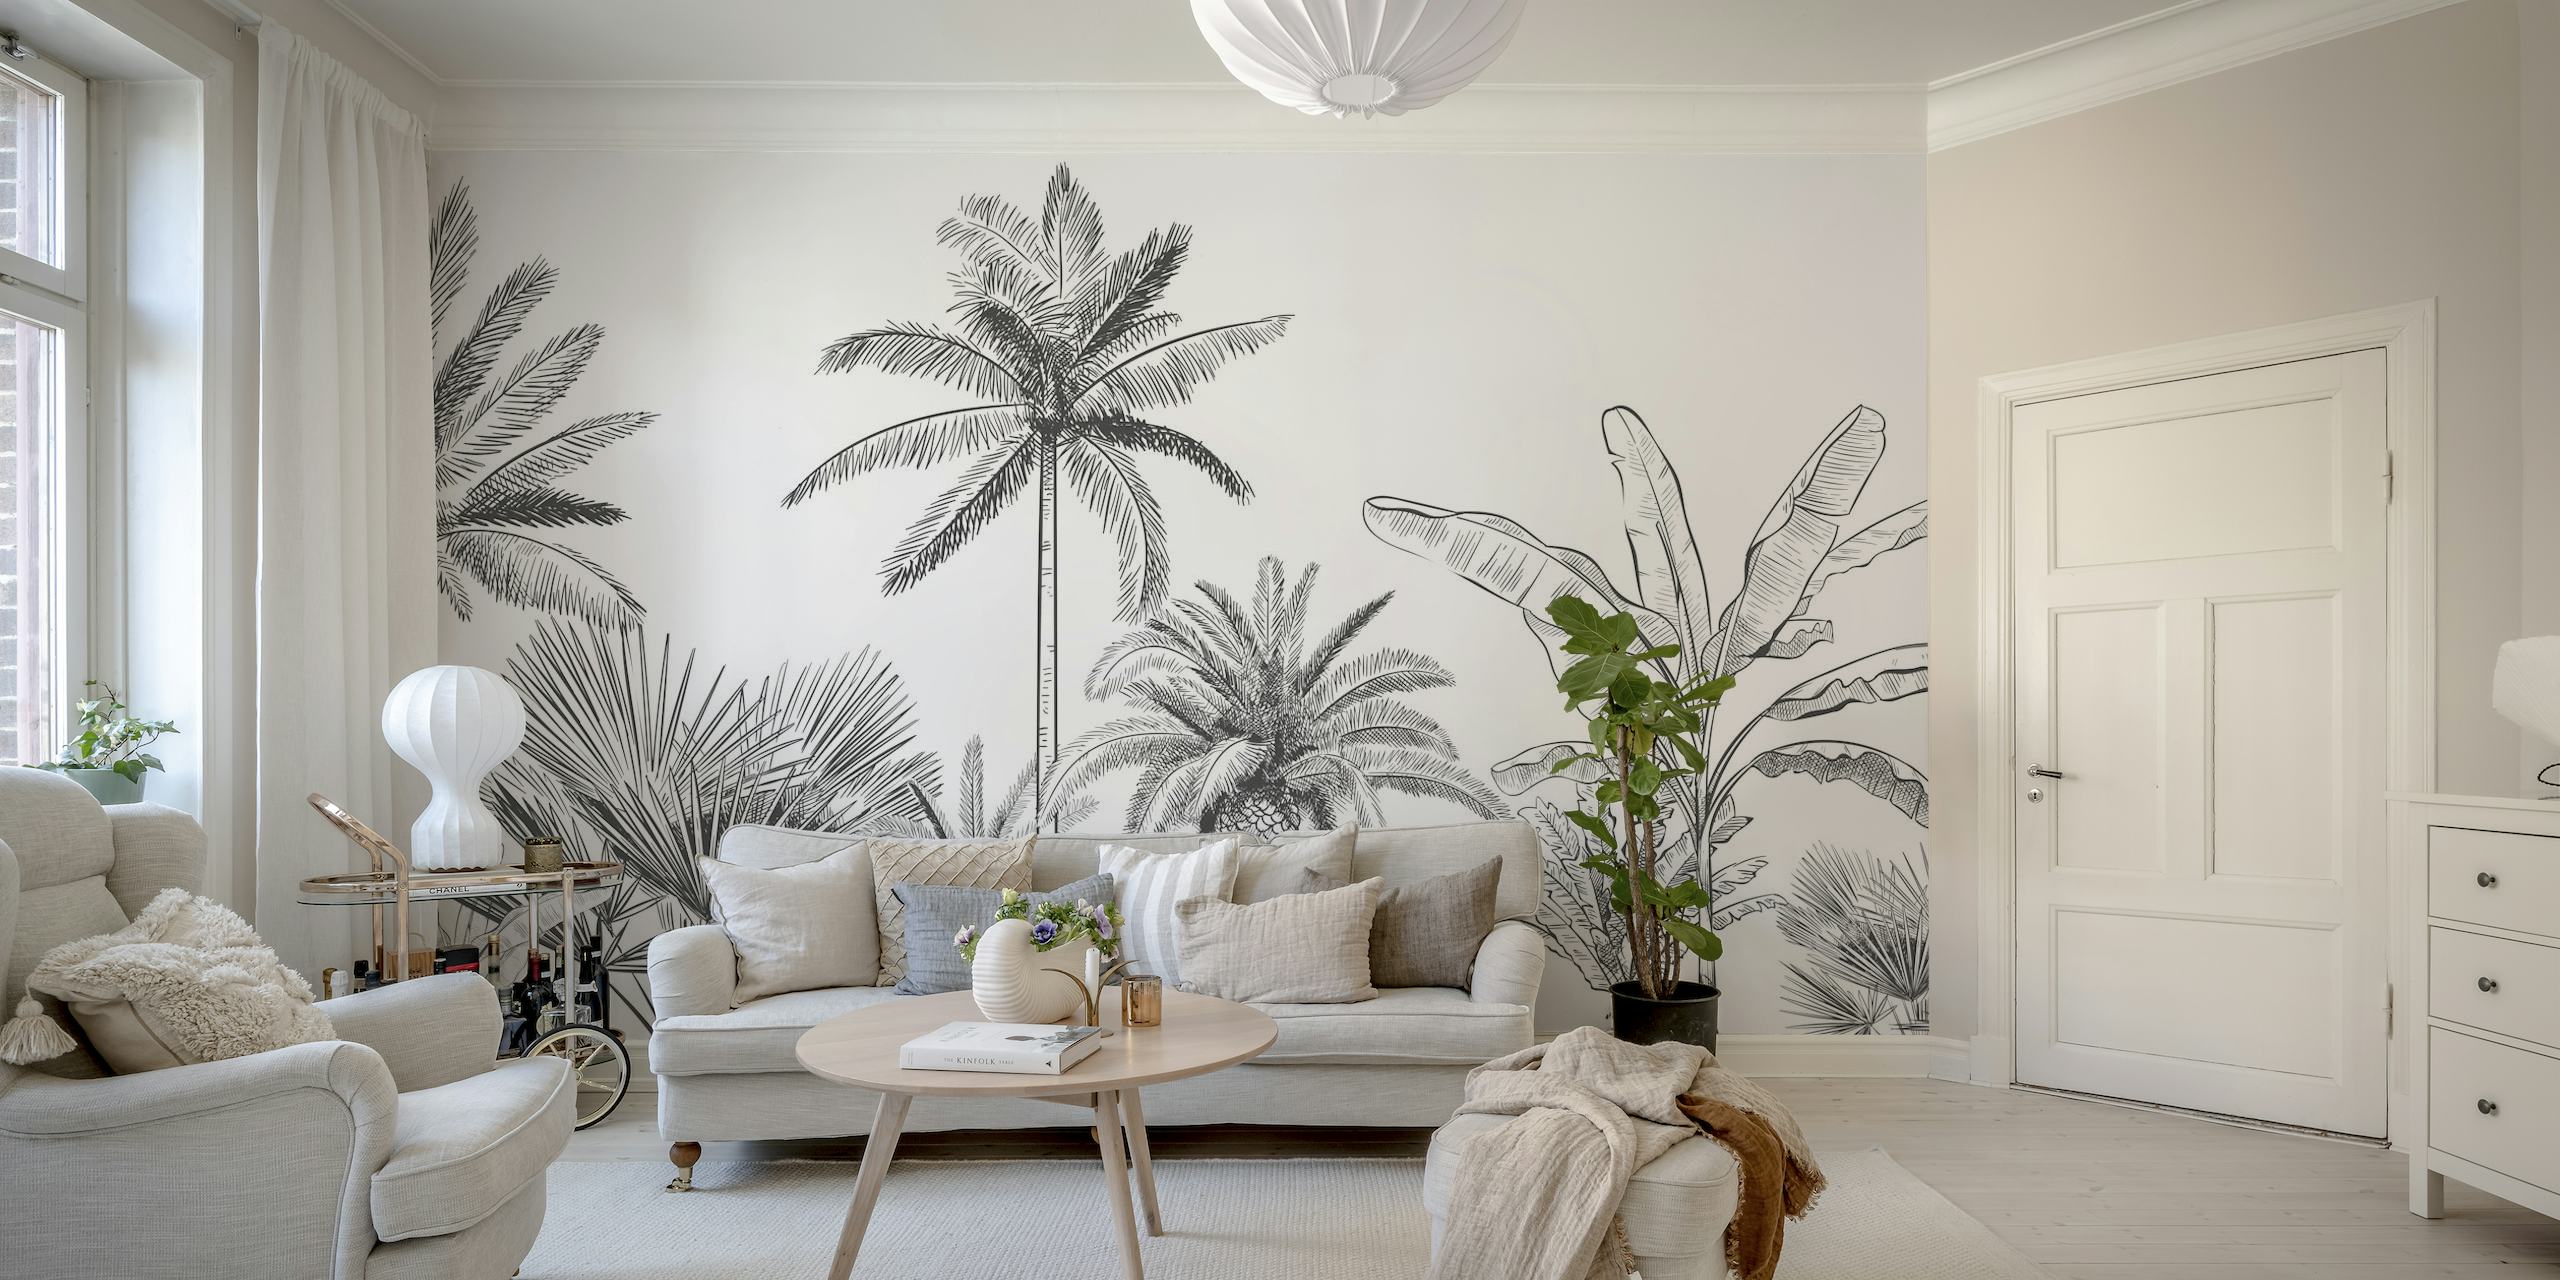 Monochrome sketch-style palm trees wall mural